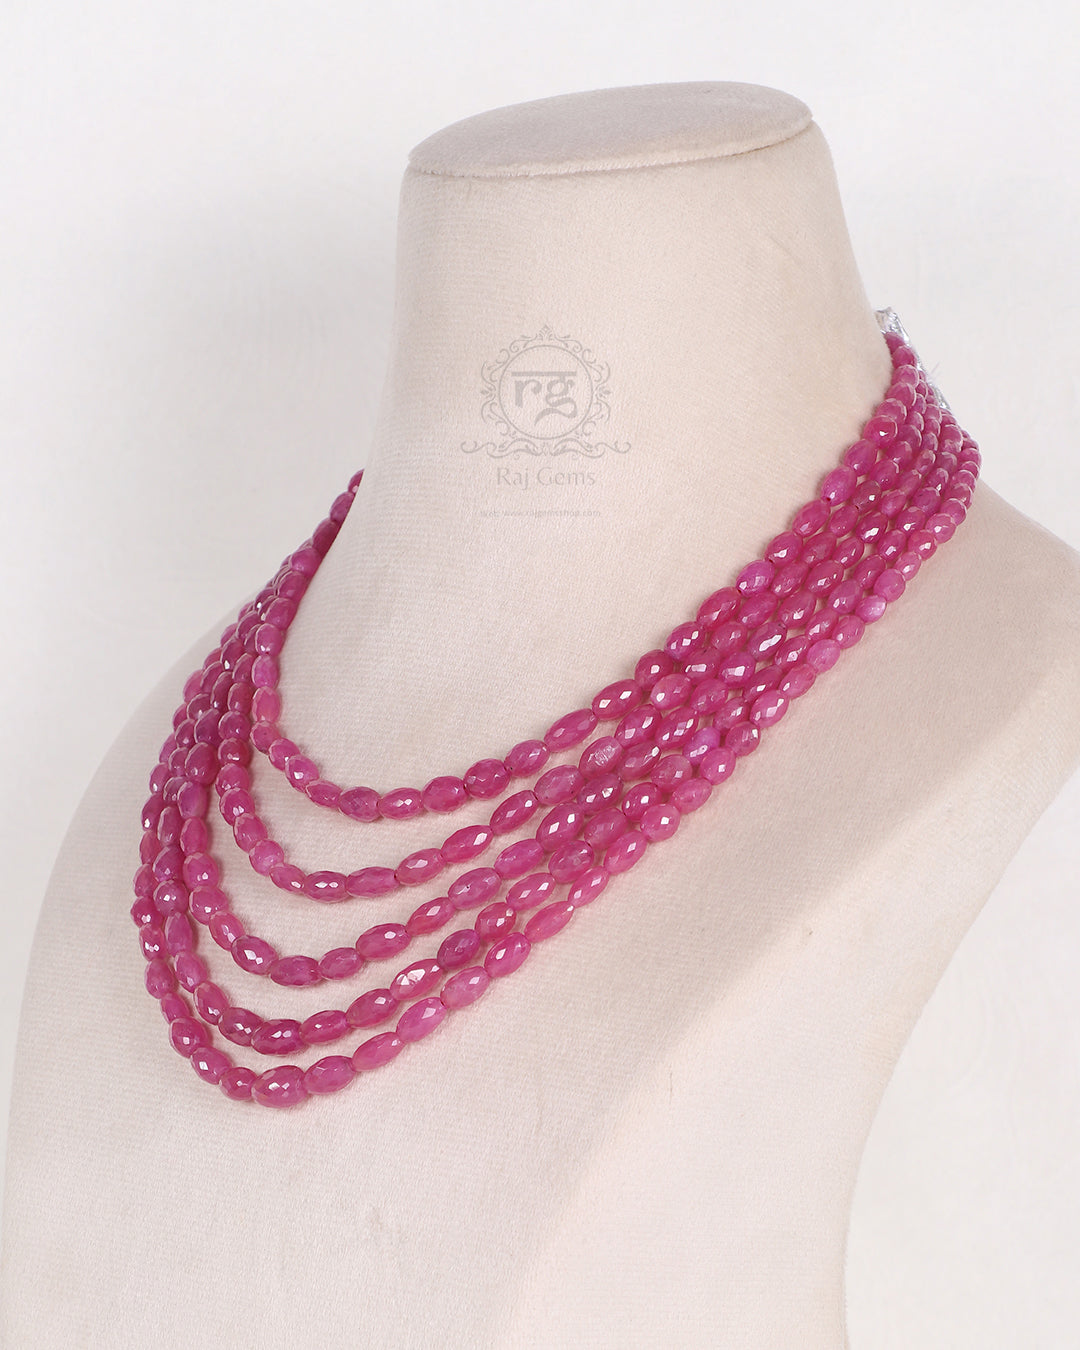 Natural Ruby Gemstone Beads Necklace Jewelry